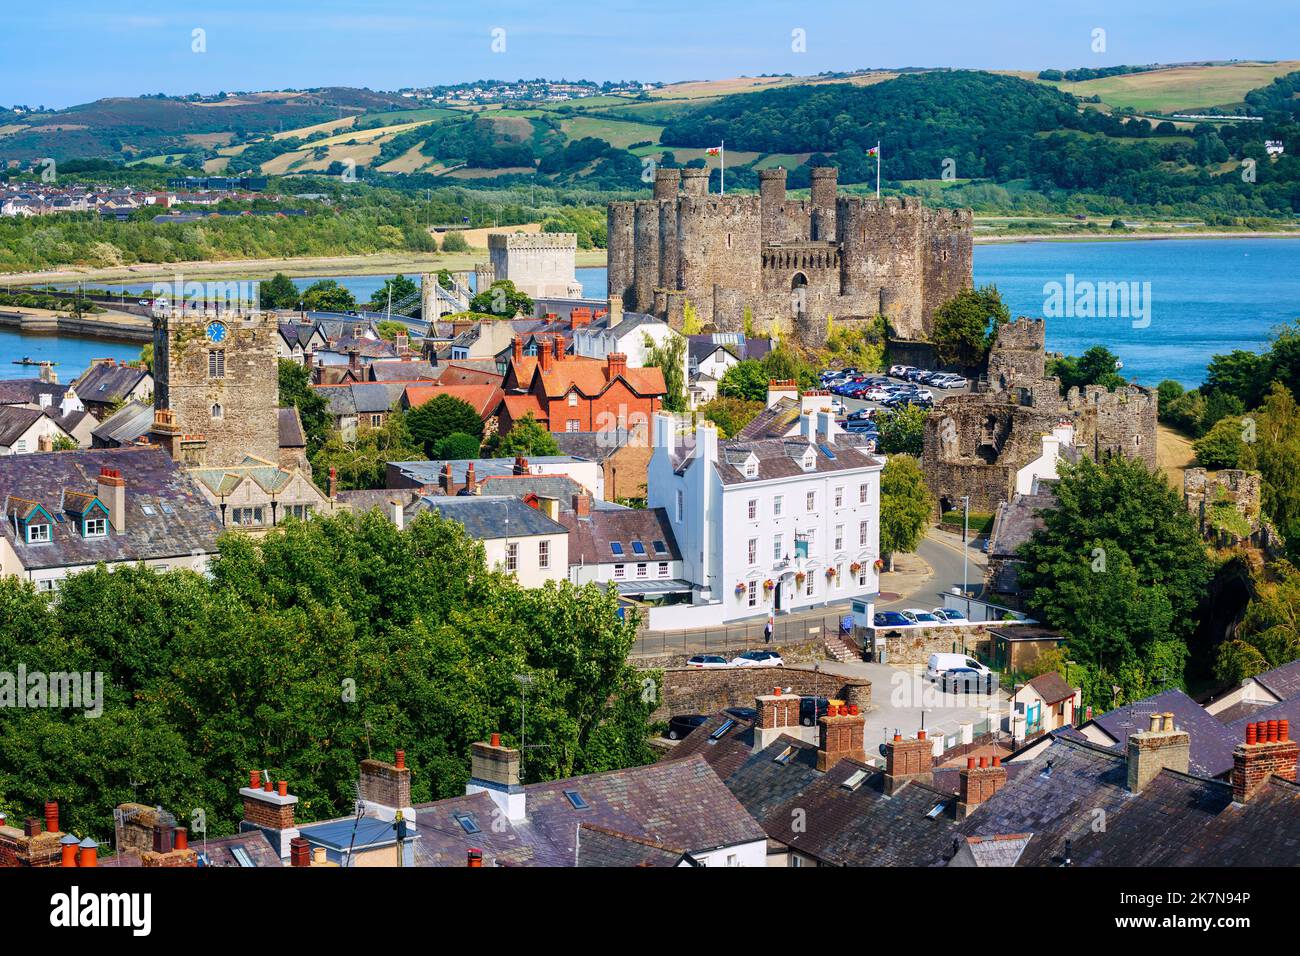 Historical Conwy town and castle, North Wales, United Kingdom, is one of the most popular welsh tourist destinations Stock Photo